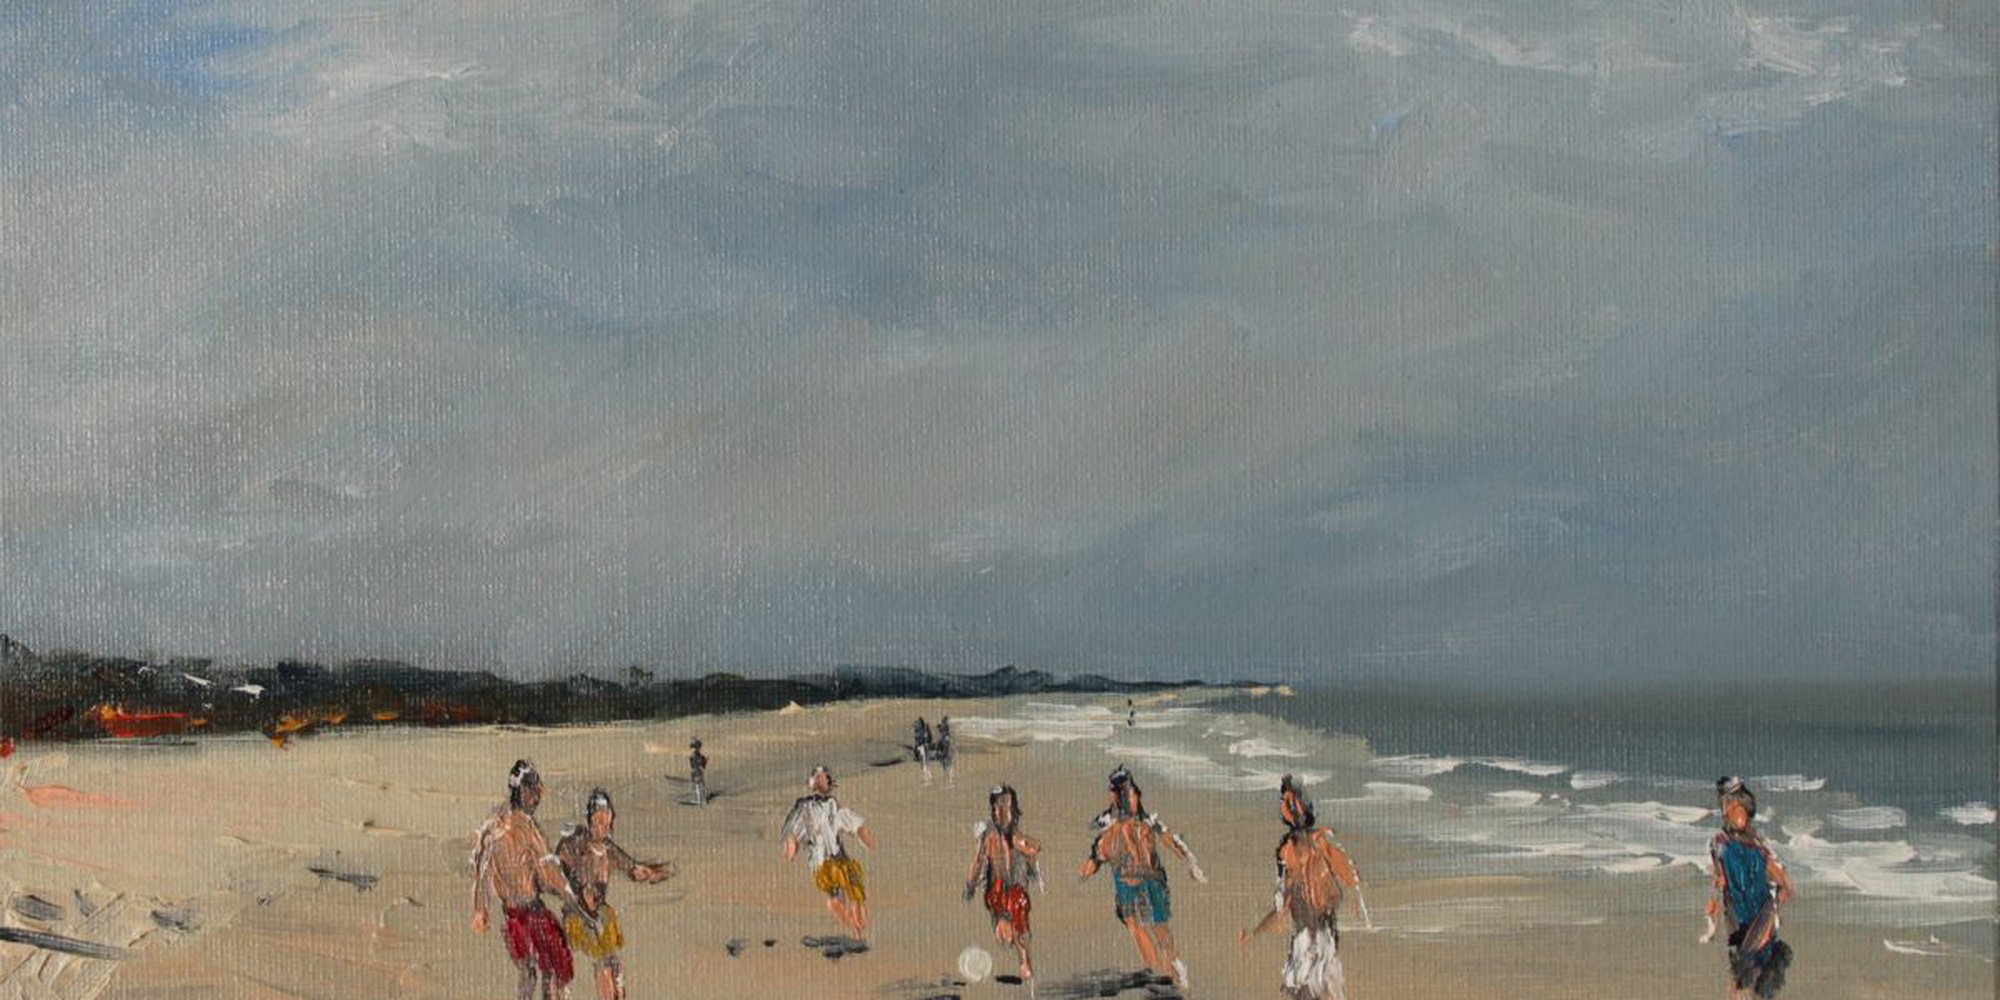 Art of the Day: "Beach Kickabout., 2013" by John Halliday